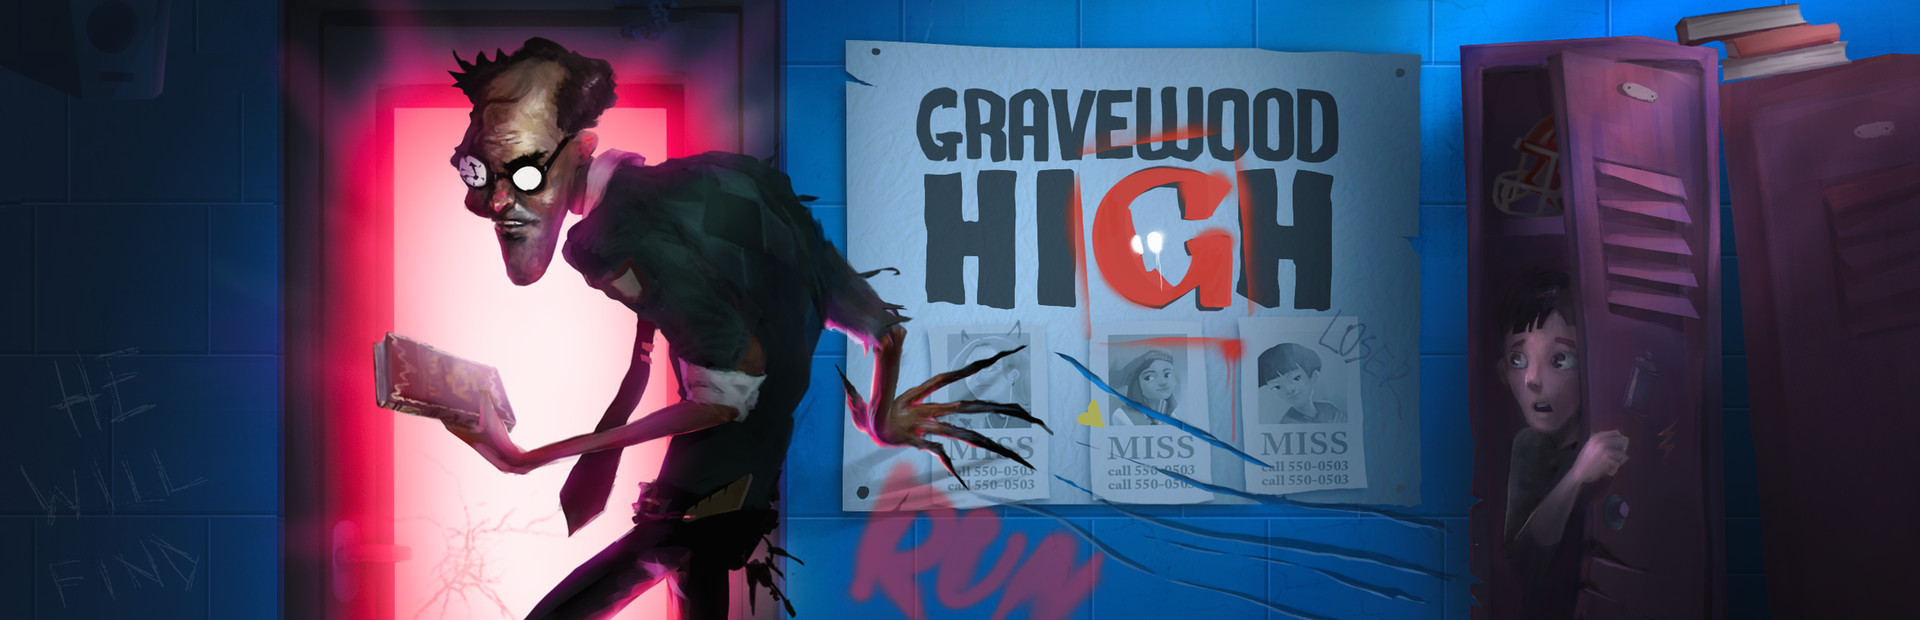 Gravewood High cover image